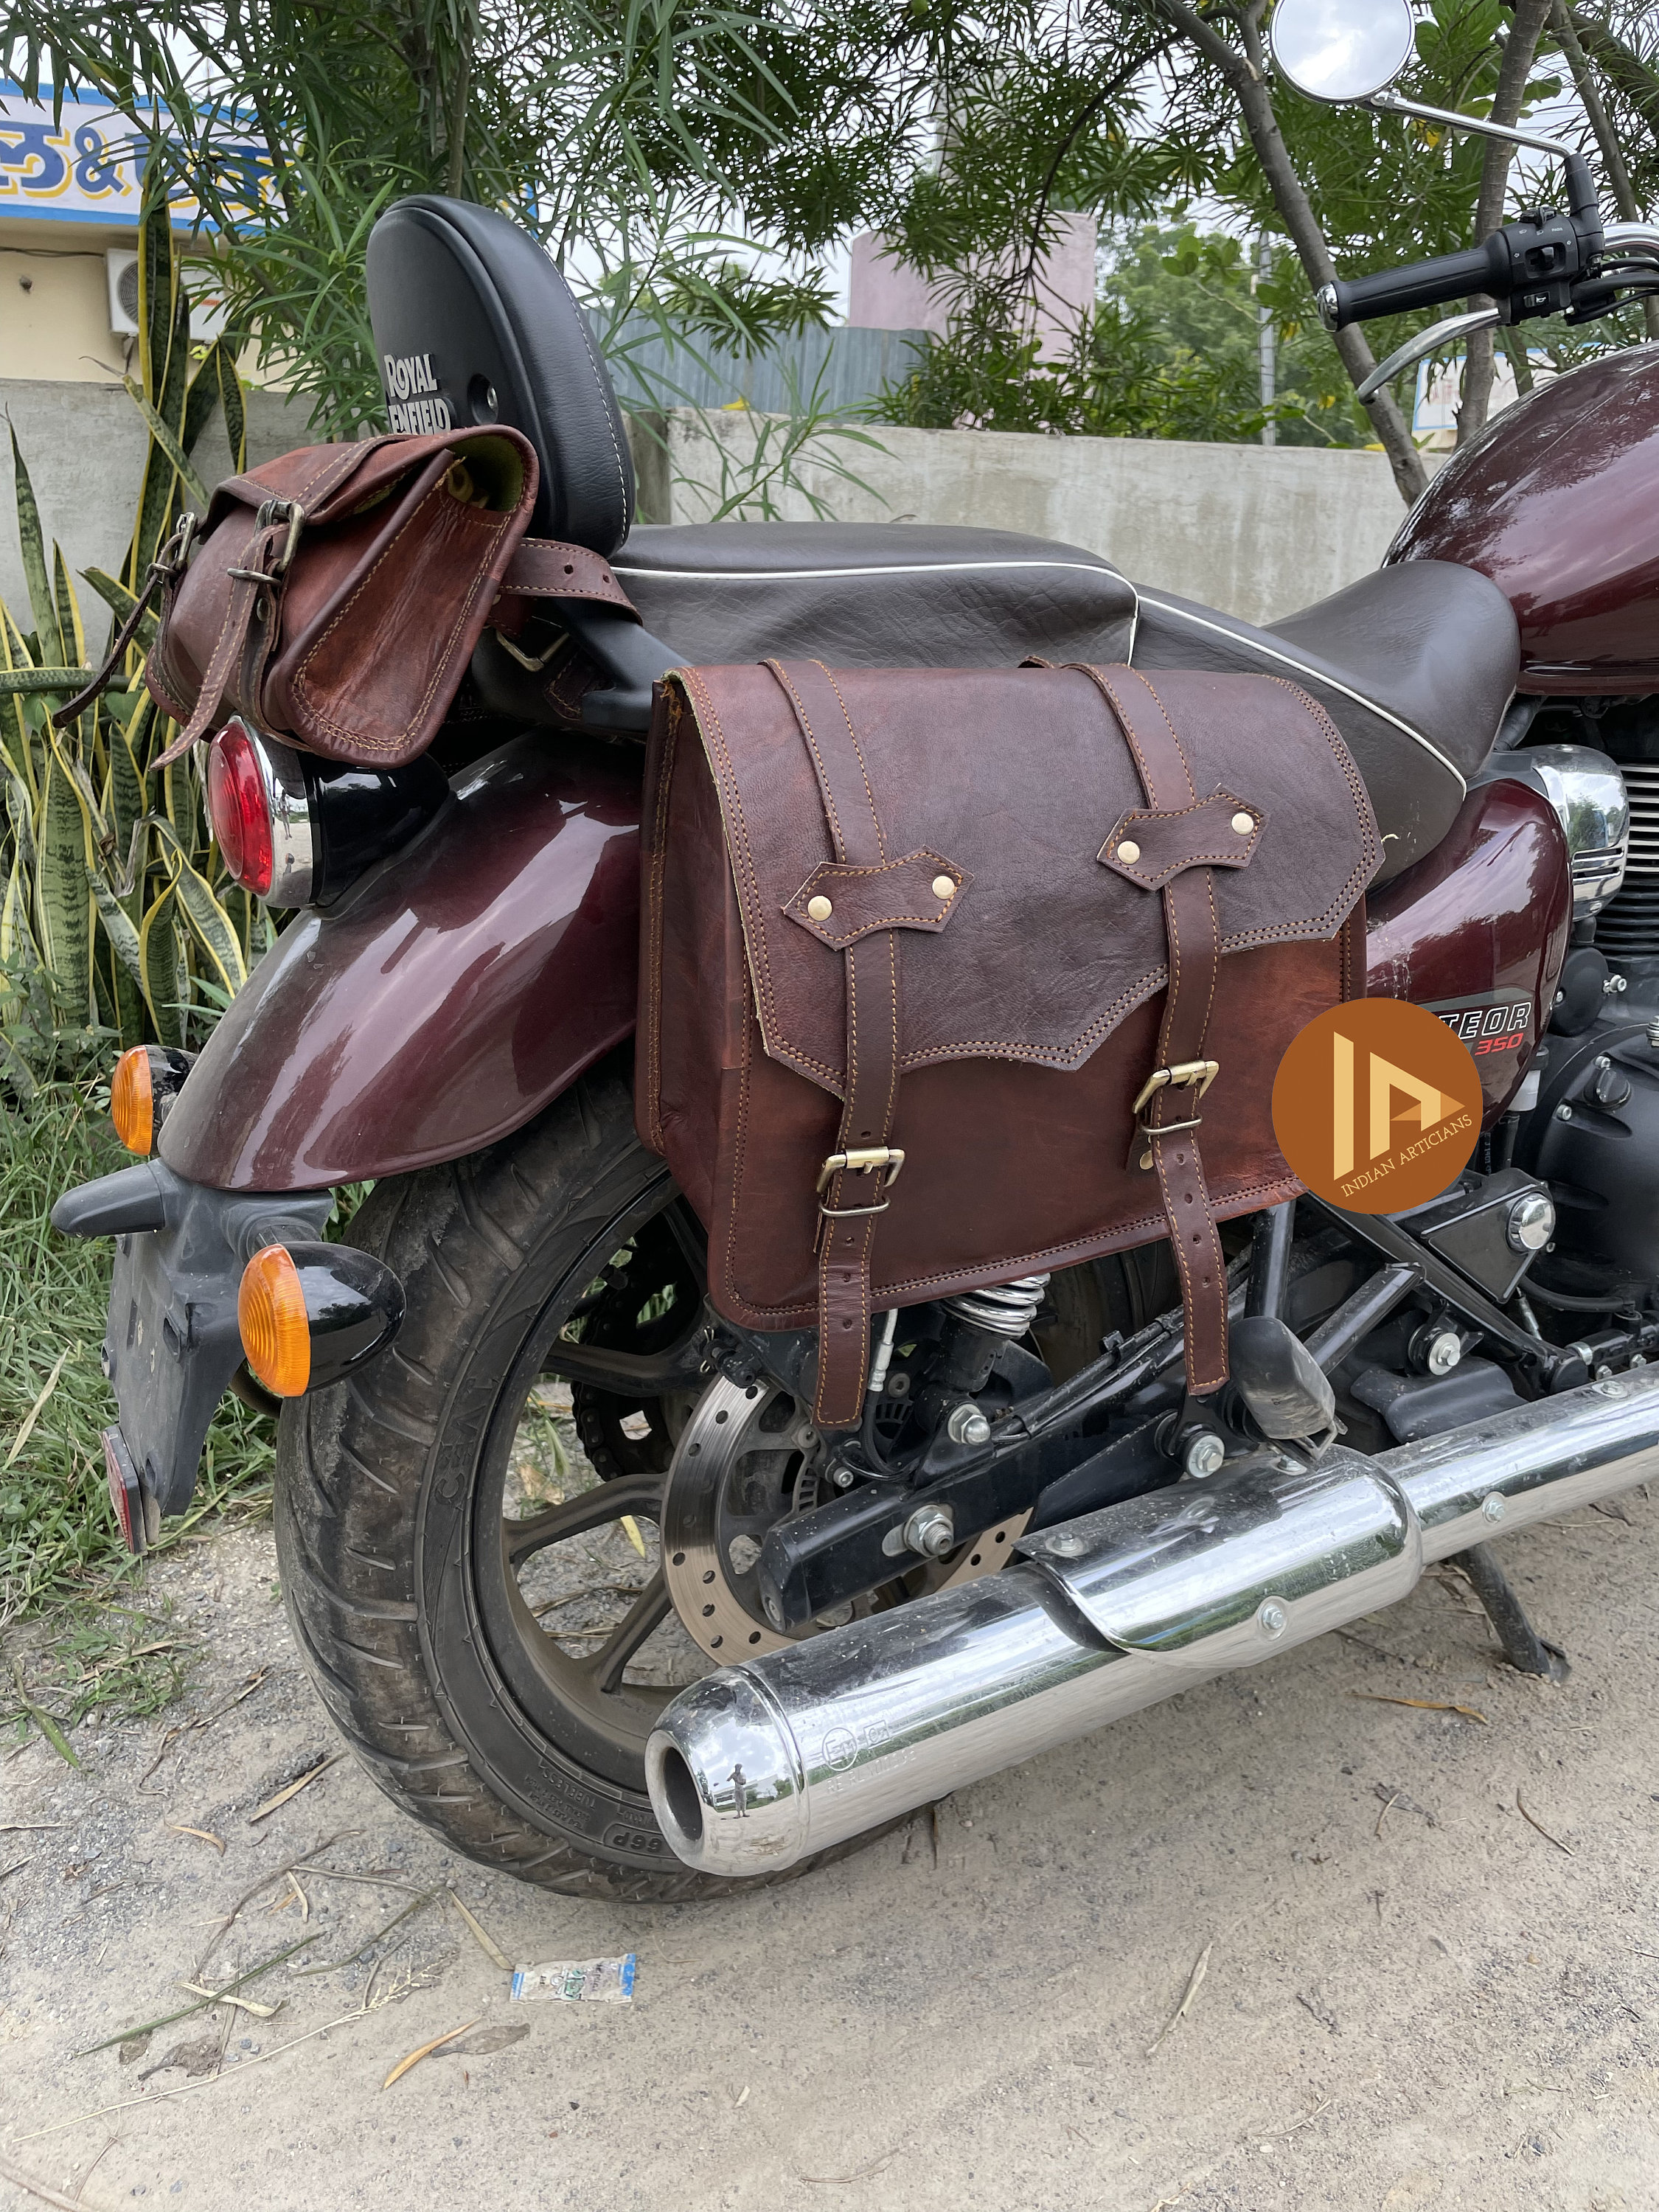 Details more than 85 leather bike bags latest - in.cdgdbentre